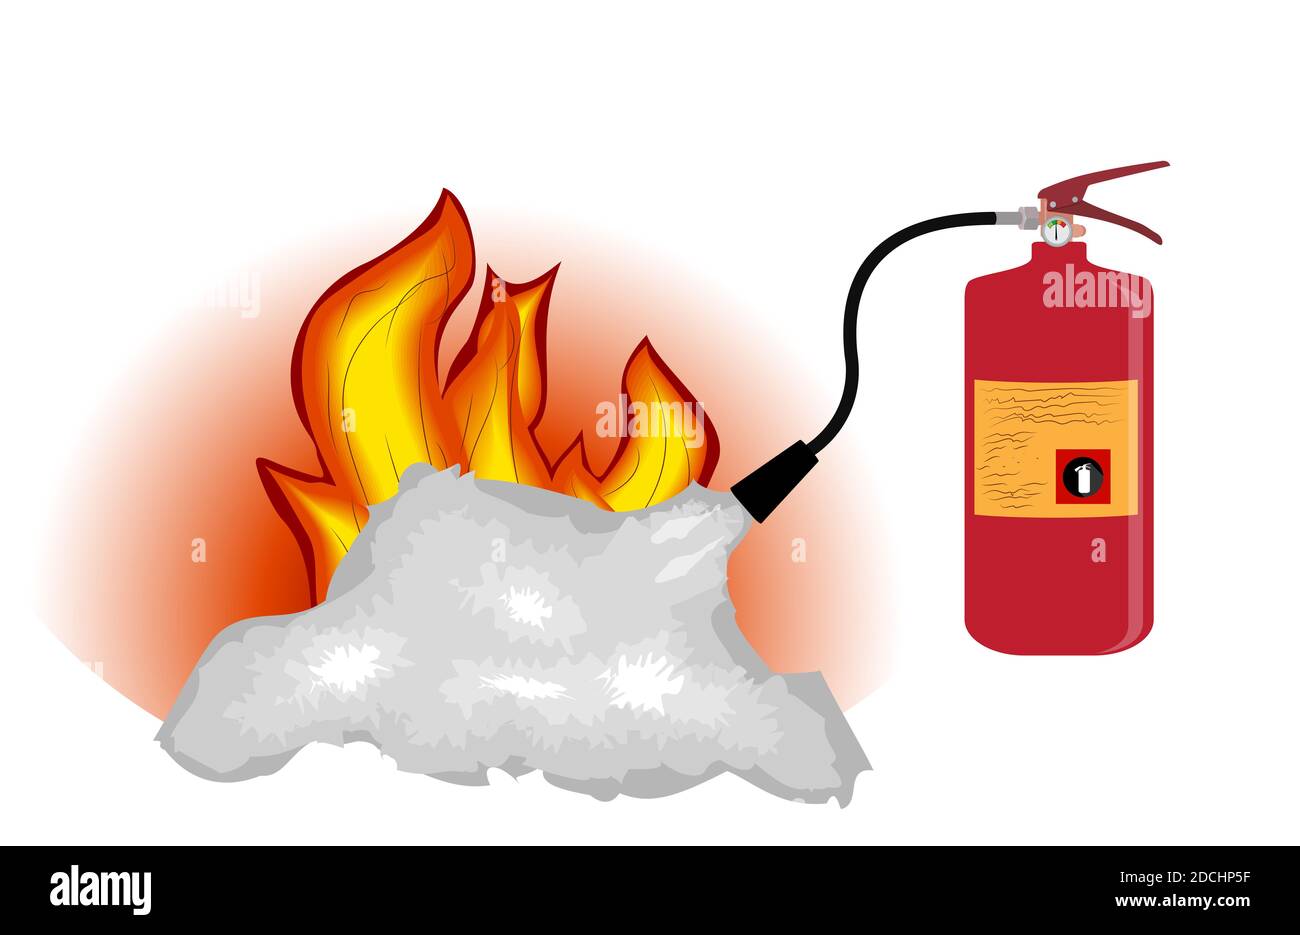 Fire Extinguisher which extinguishes fire Isolated on White Background.  Illustration Stock Photo - Alamy